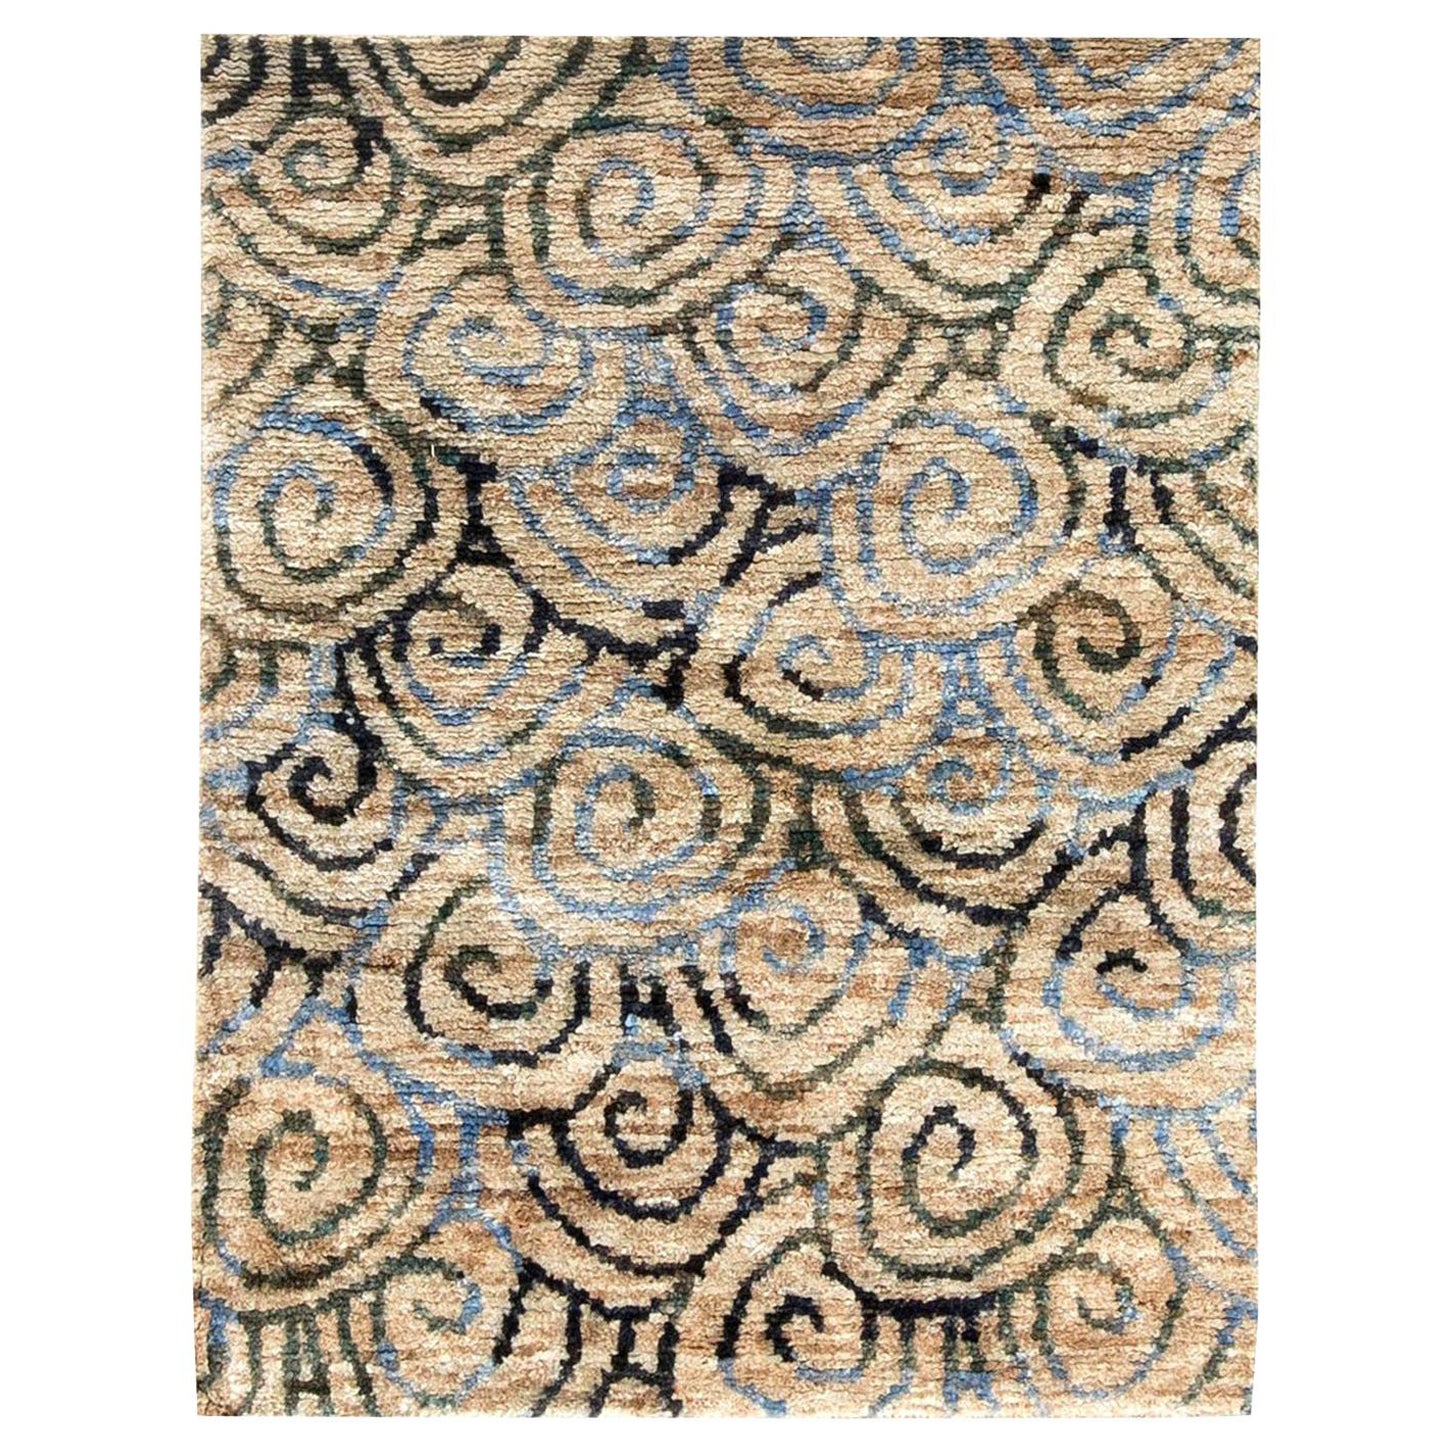 Contemporary Beige, Grey and Sky Blue Hand Knotted Hemp Rug by Doris Leslie Blau For Sale